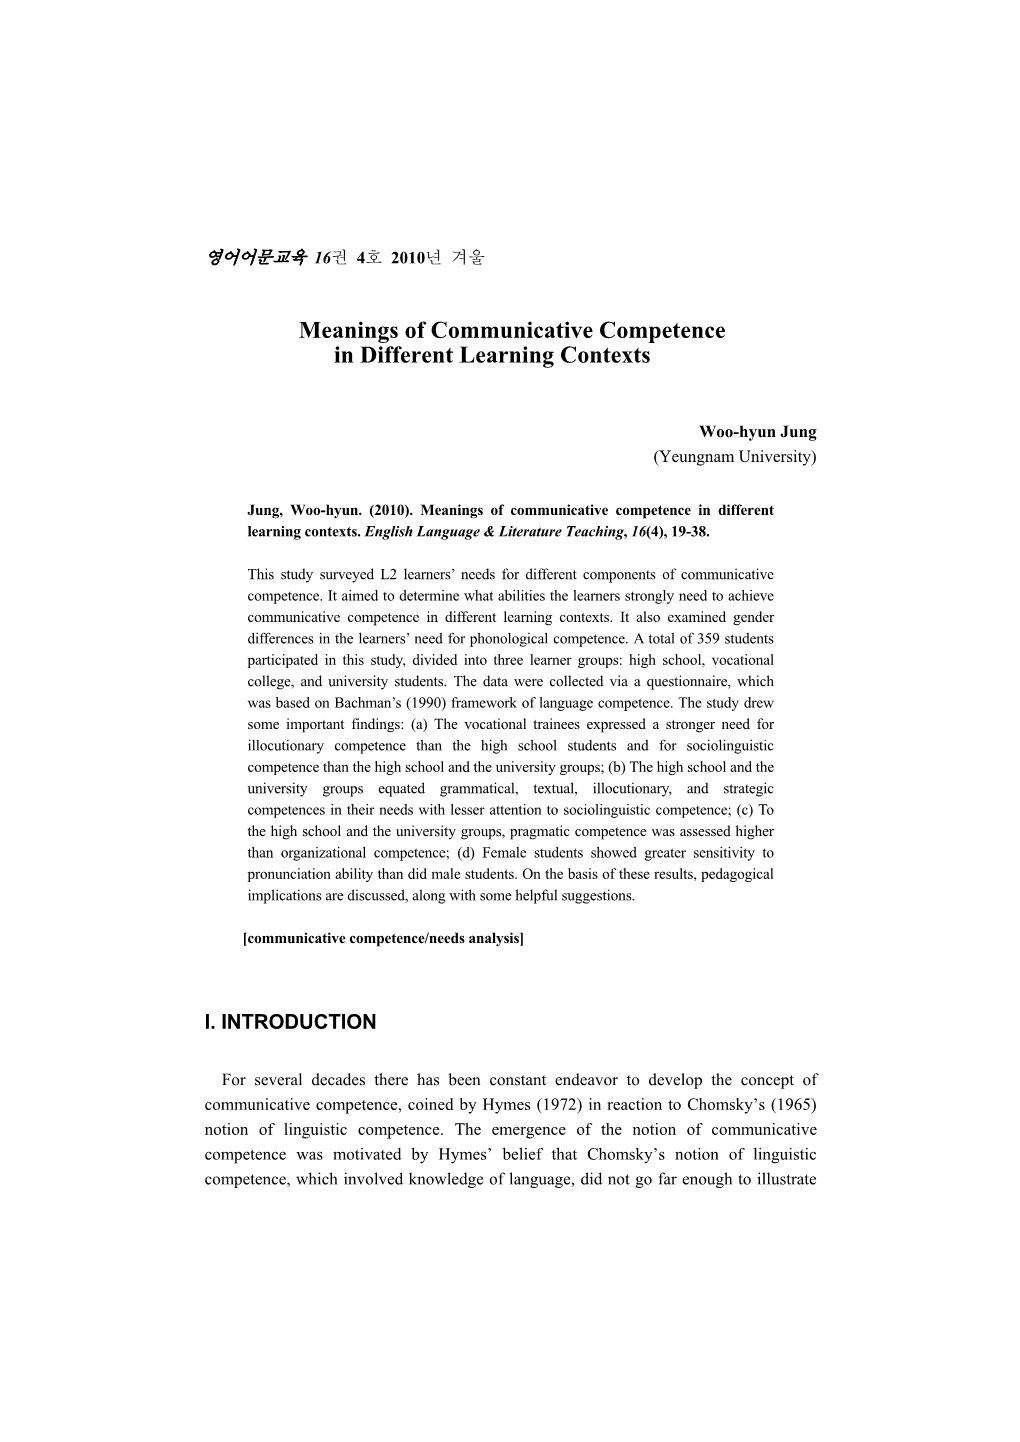 Meanings of Communicative Competence in Different Learning Contexts